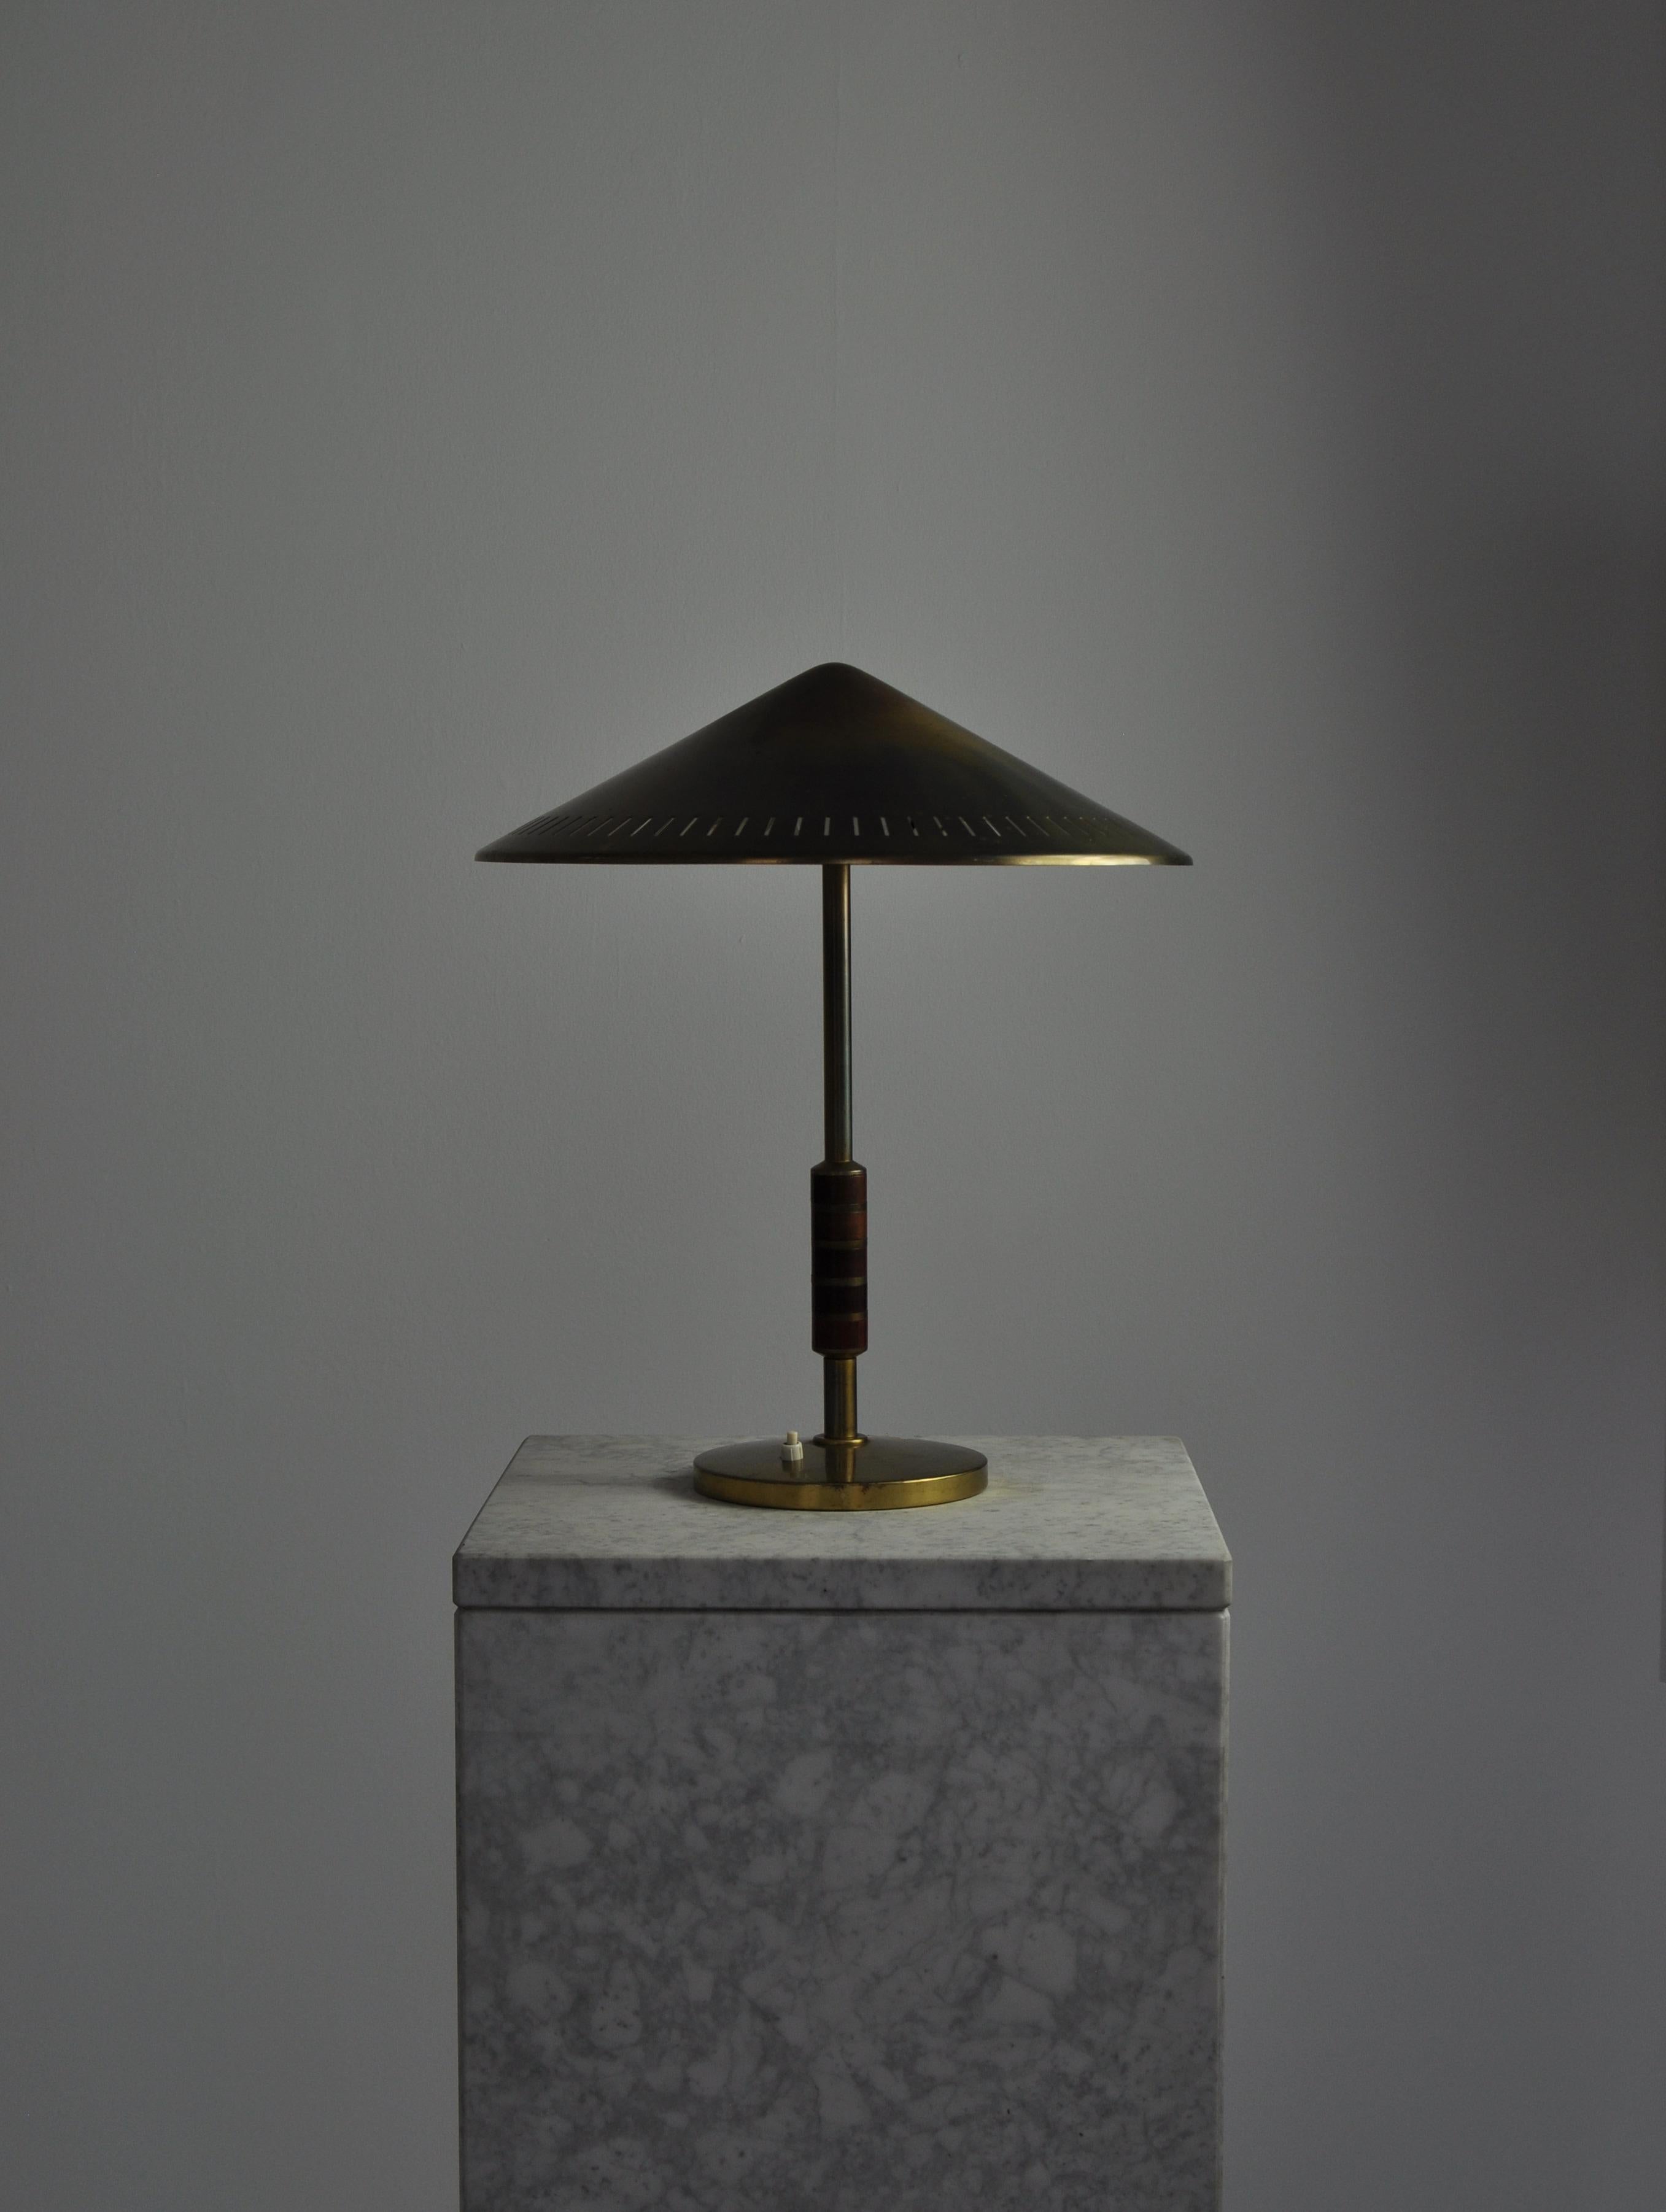 Large table lamp in solid brass with mahogany handle. Manufactured by LYFA, Copenhagen in the 1950s and designed by Danish designer Bent Karlby. The lamp has two light sources. Great original condition.